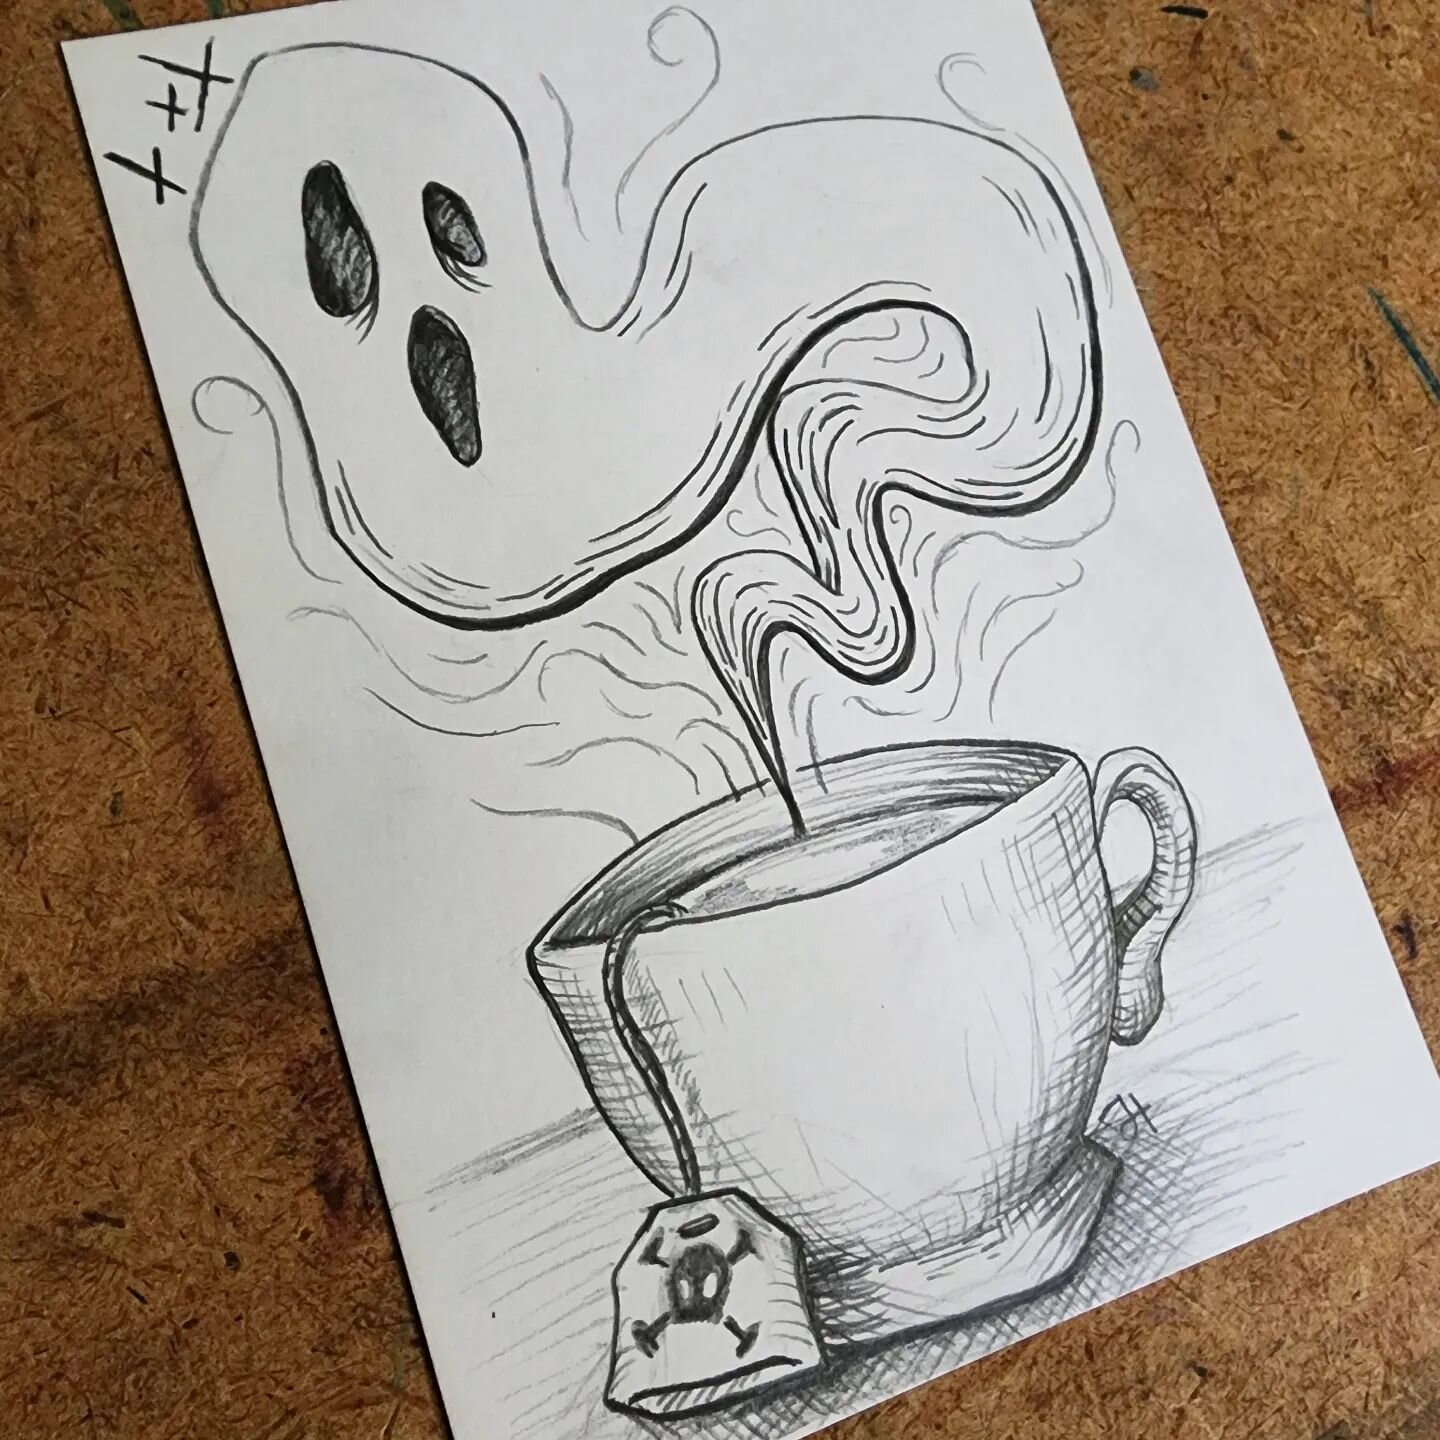 🫖☠️Tea Time☠️🫖
I've got an early jump on my 31 days of spooky art for October. Here is a sketch of an upcoming piece that I think is just to die for.

#sketchbook #pencildrawing #spooky #gohst #teatime #tealover #poison #halloween2022 #horror